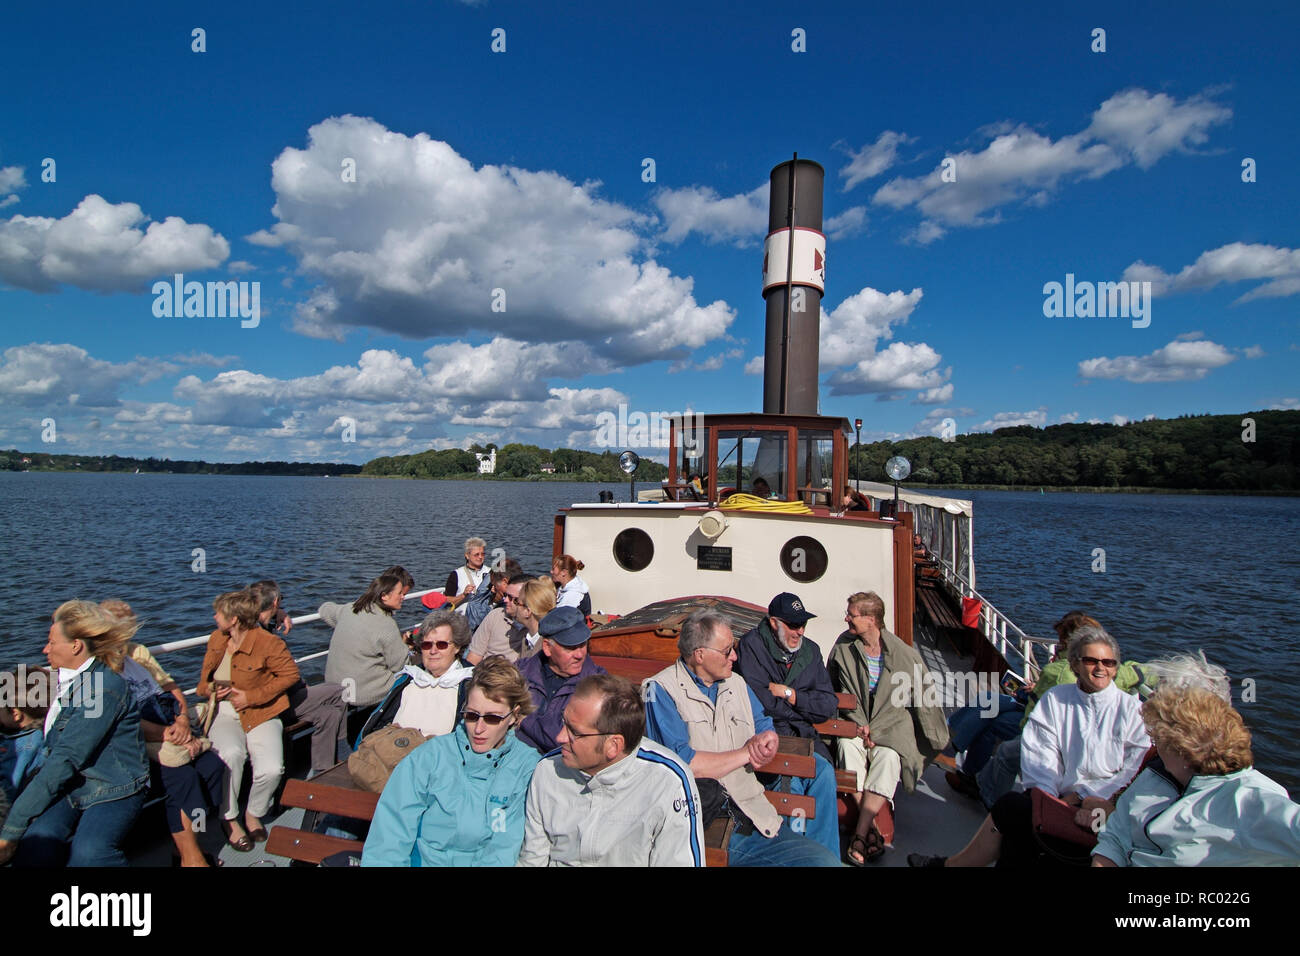 Dampfschiff High Resolution Stock Photography and Images - Alamy